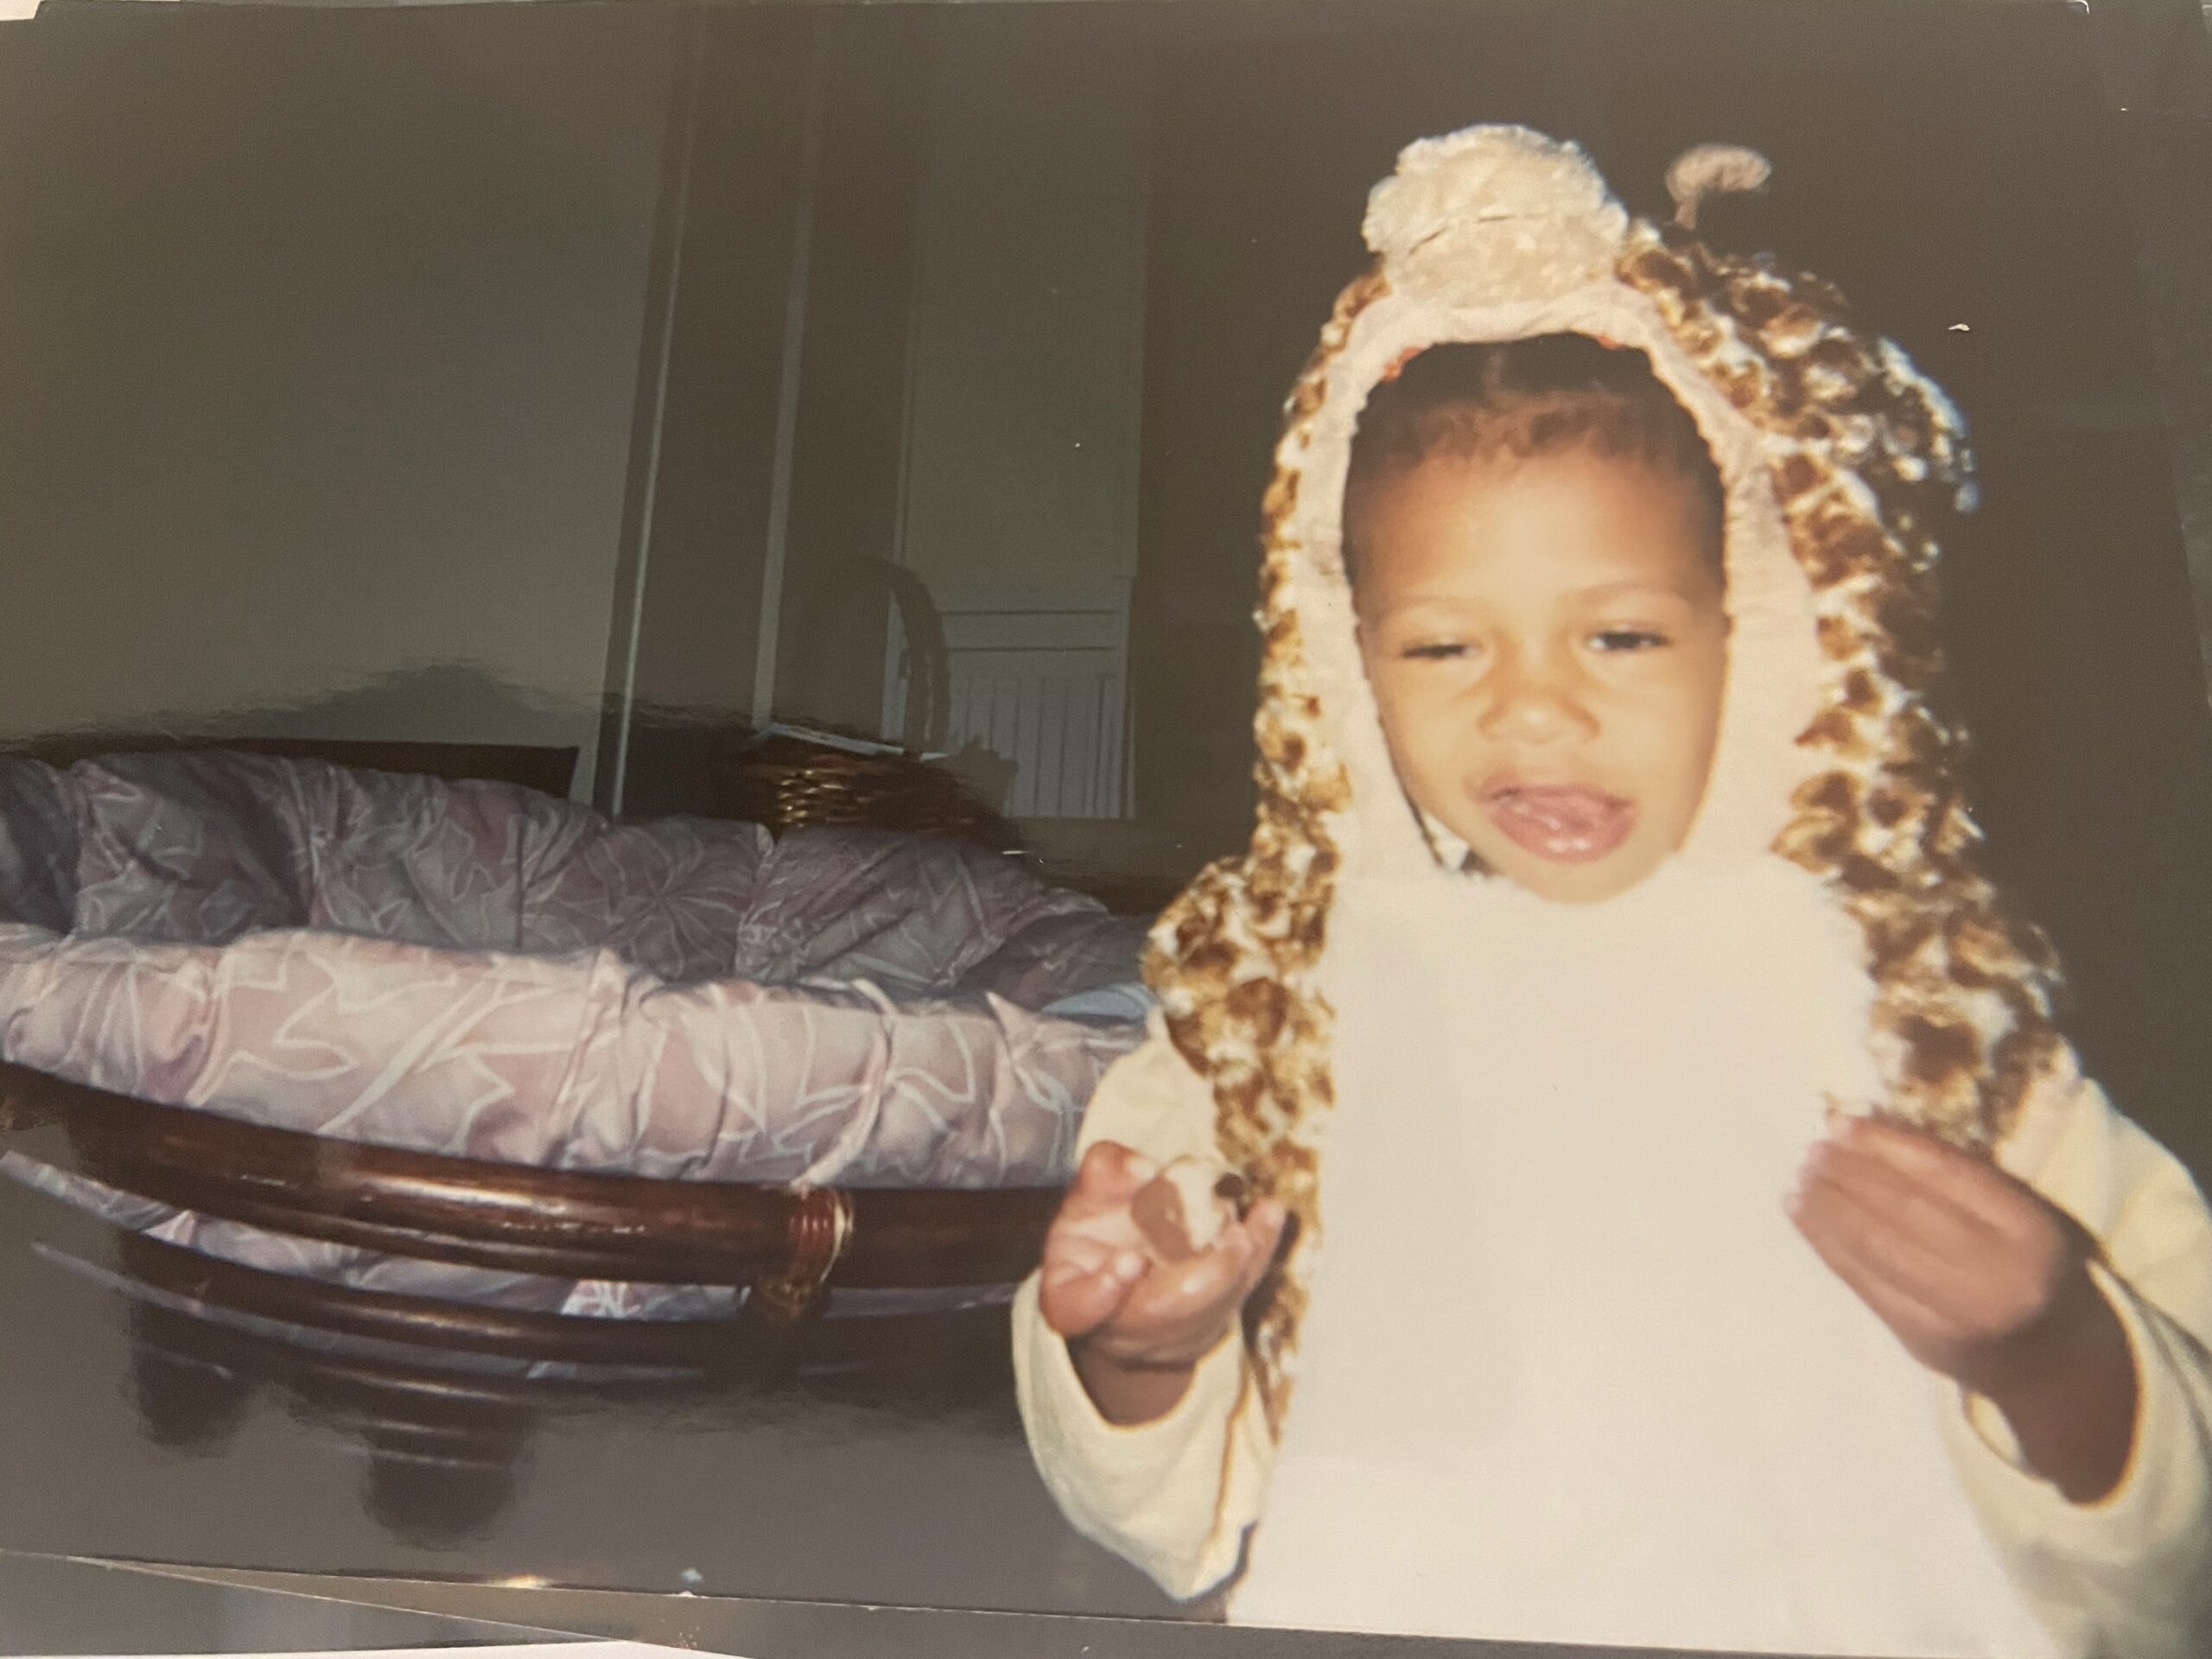 Faded photo of a young Black child in a lion costume